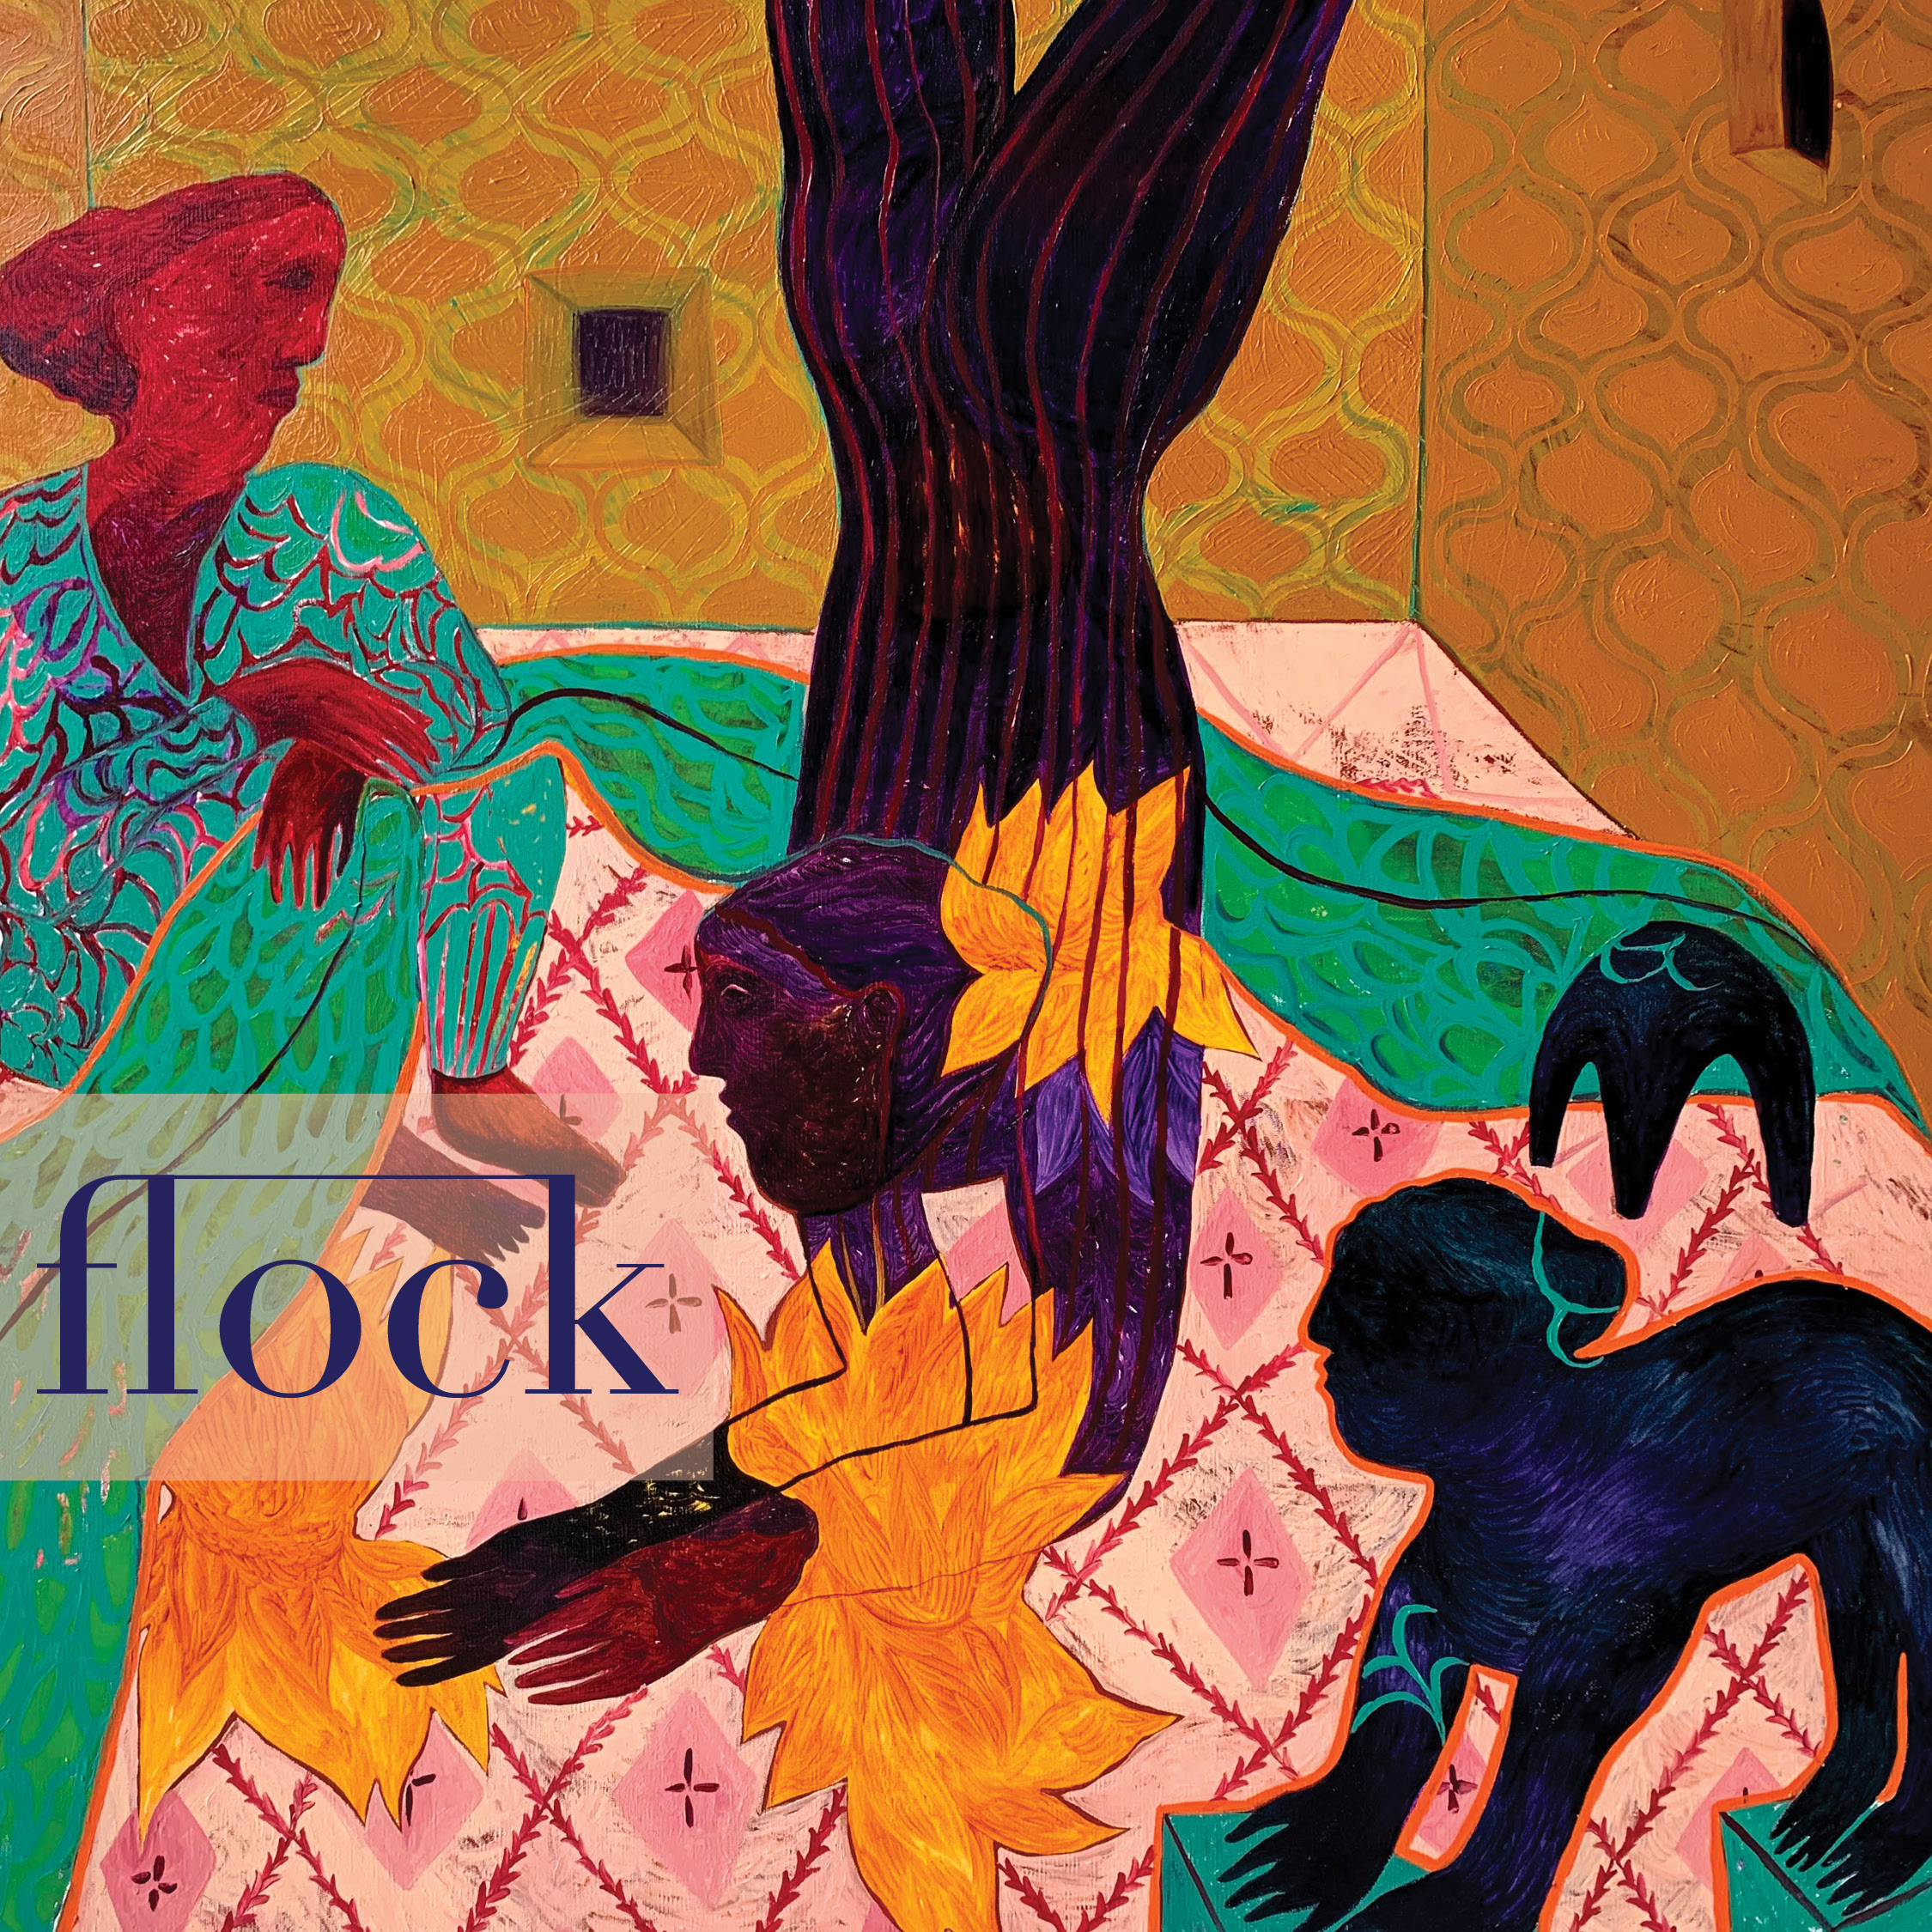 Flock 24 front cover